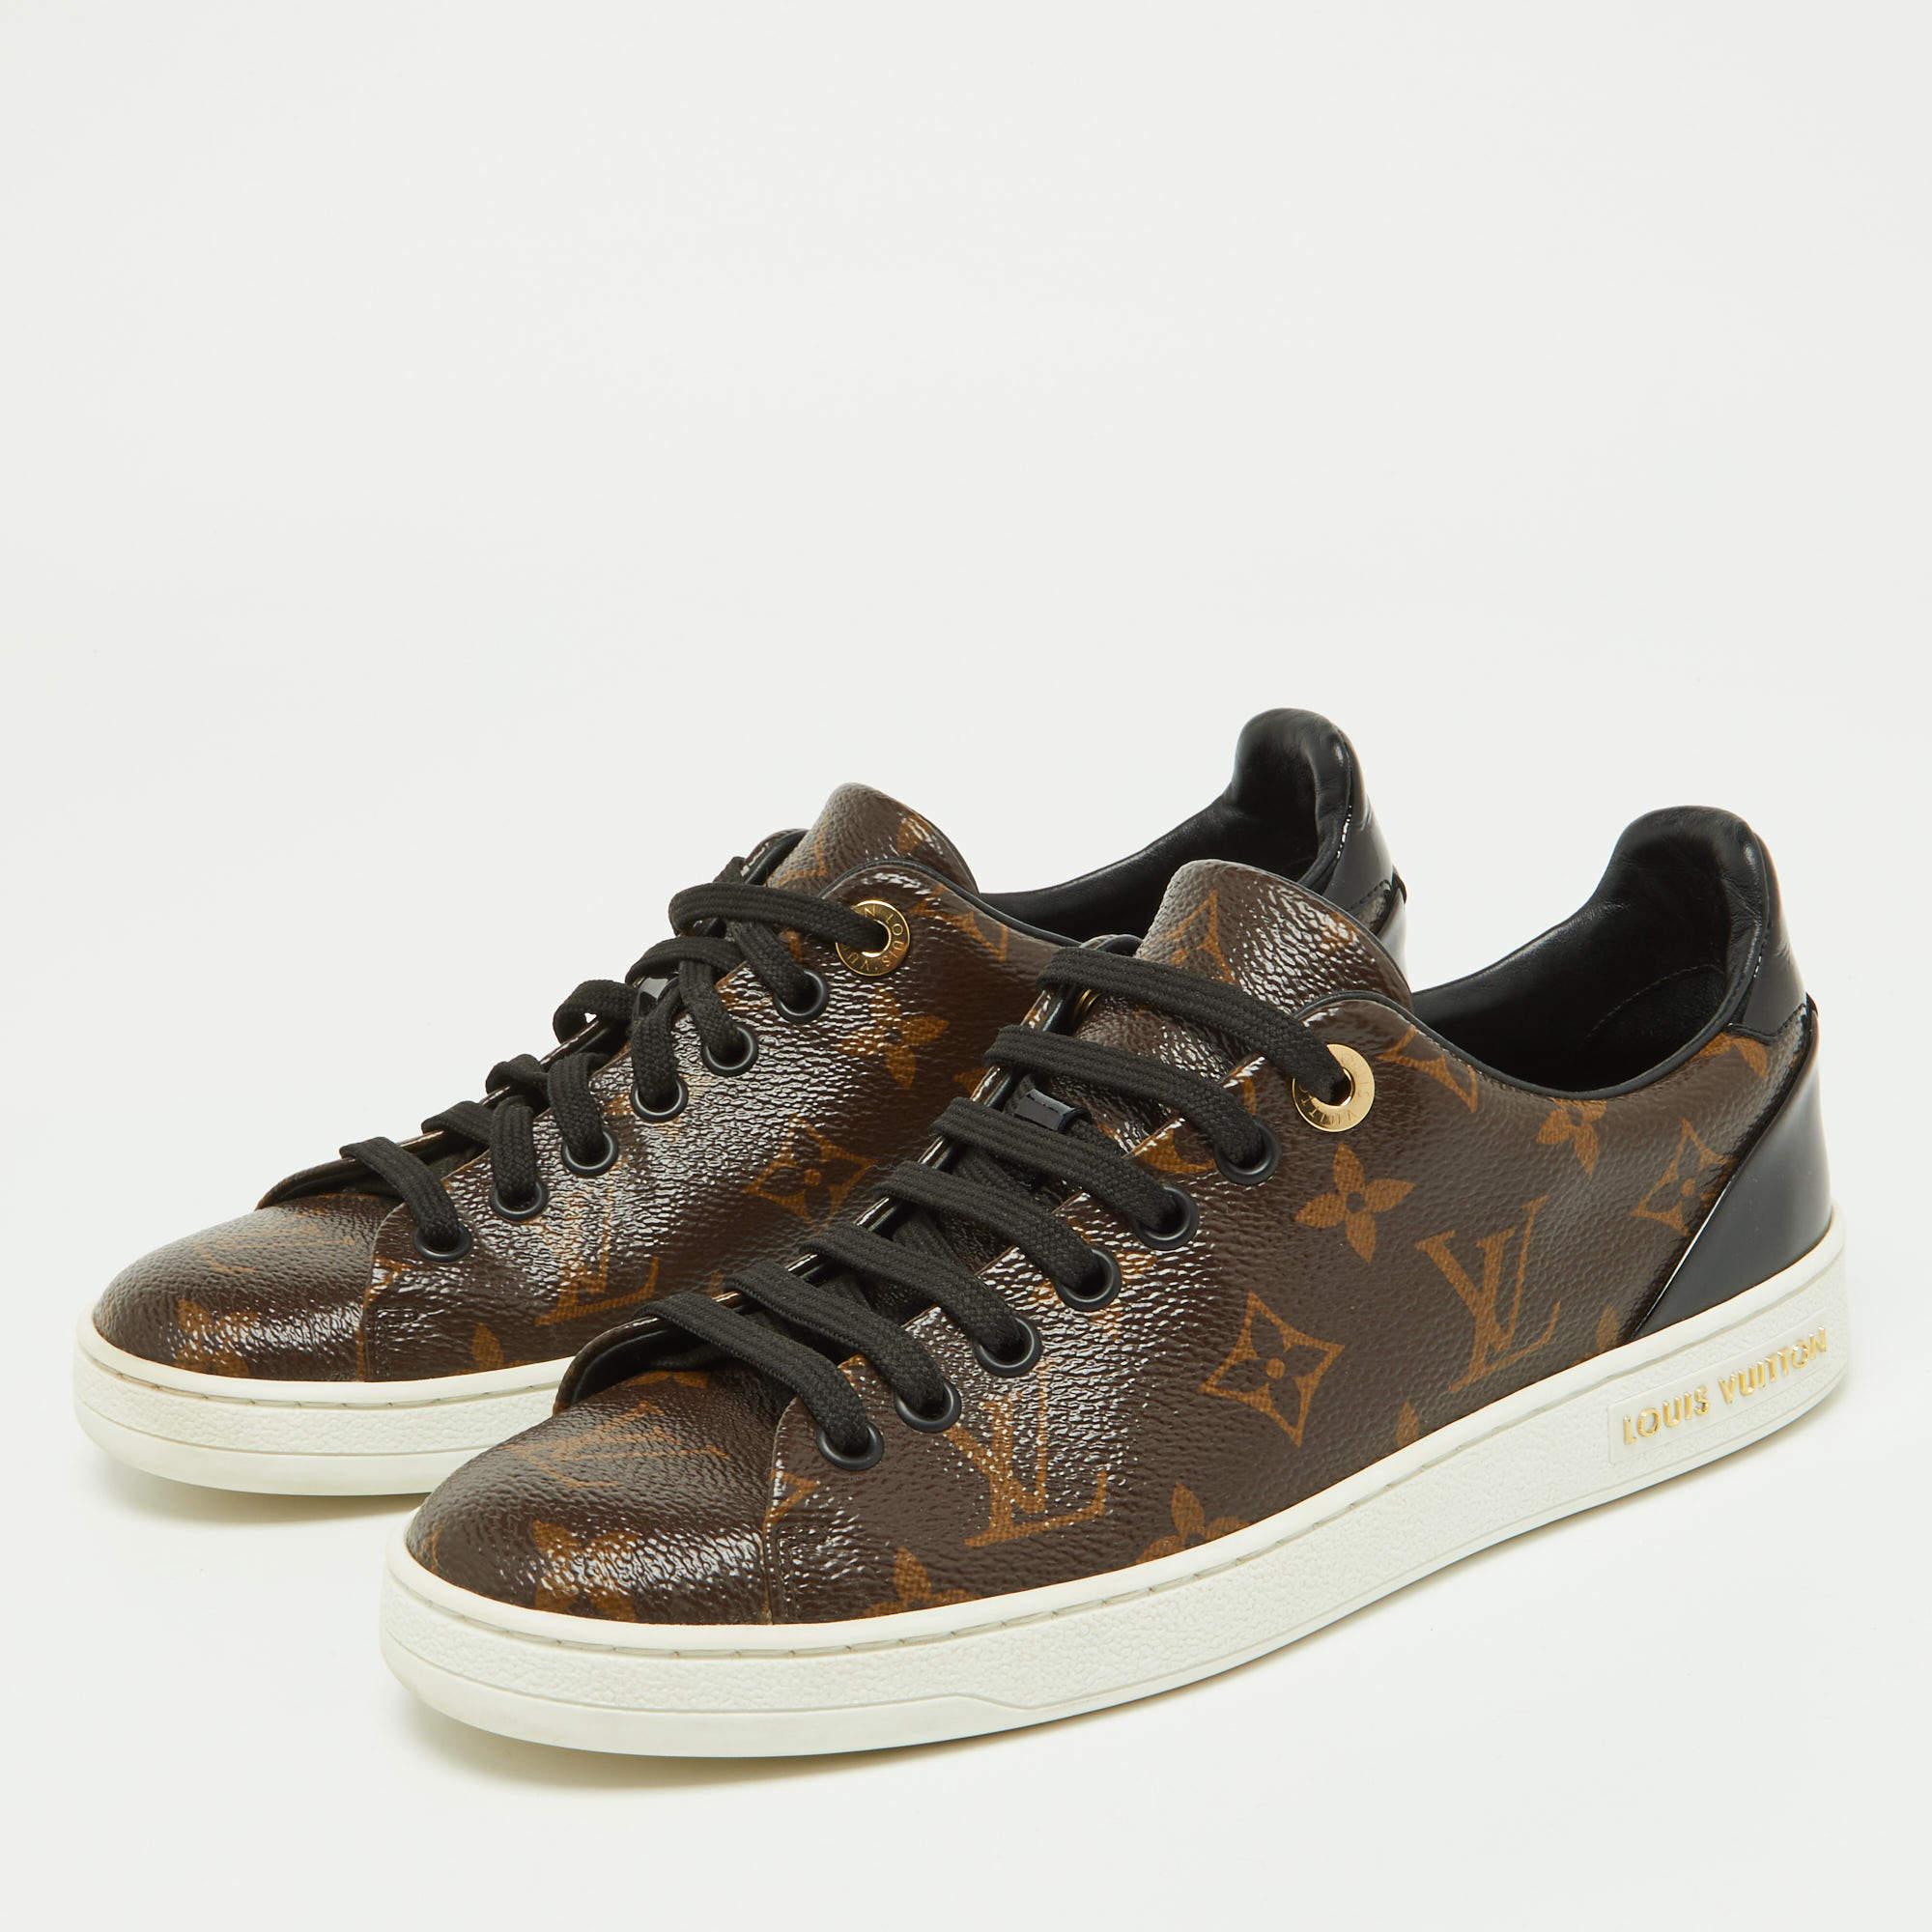 These Frontrow sneakers from Louis Vuitton are all you need to add an extra edge to your outfit. This pair has been crafted from Monogram canvas along with patent leather and styled with round toes, lace-ups and gold-tone logo details on the